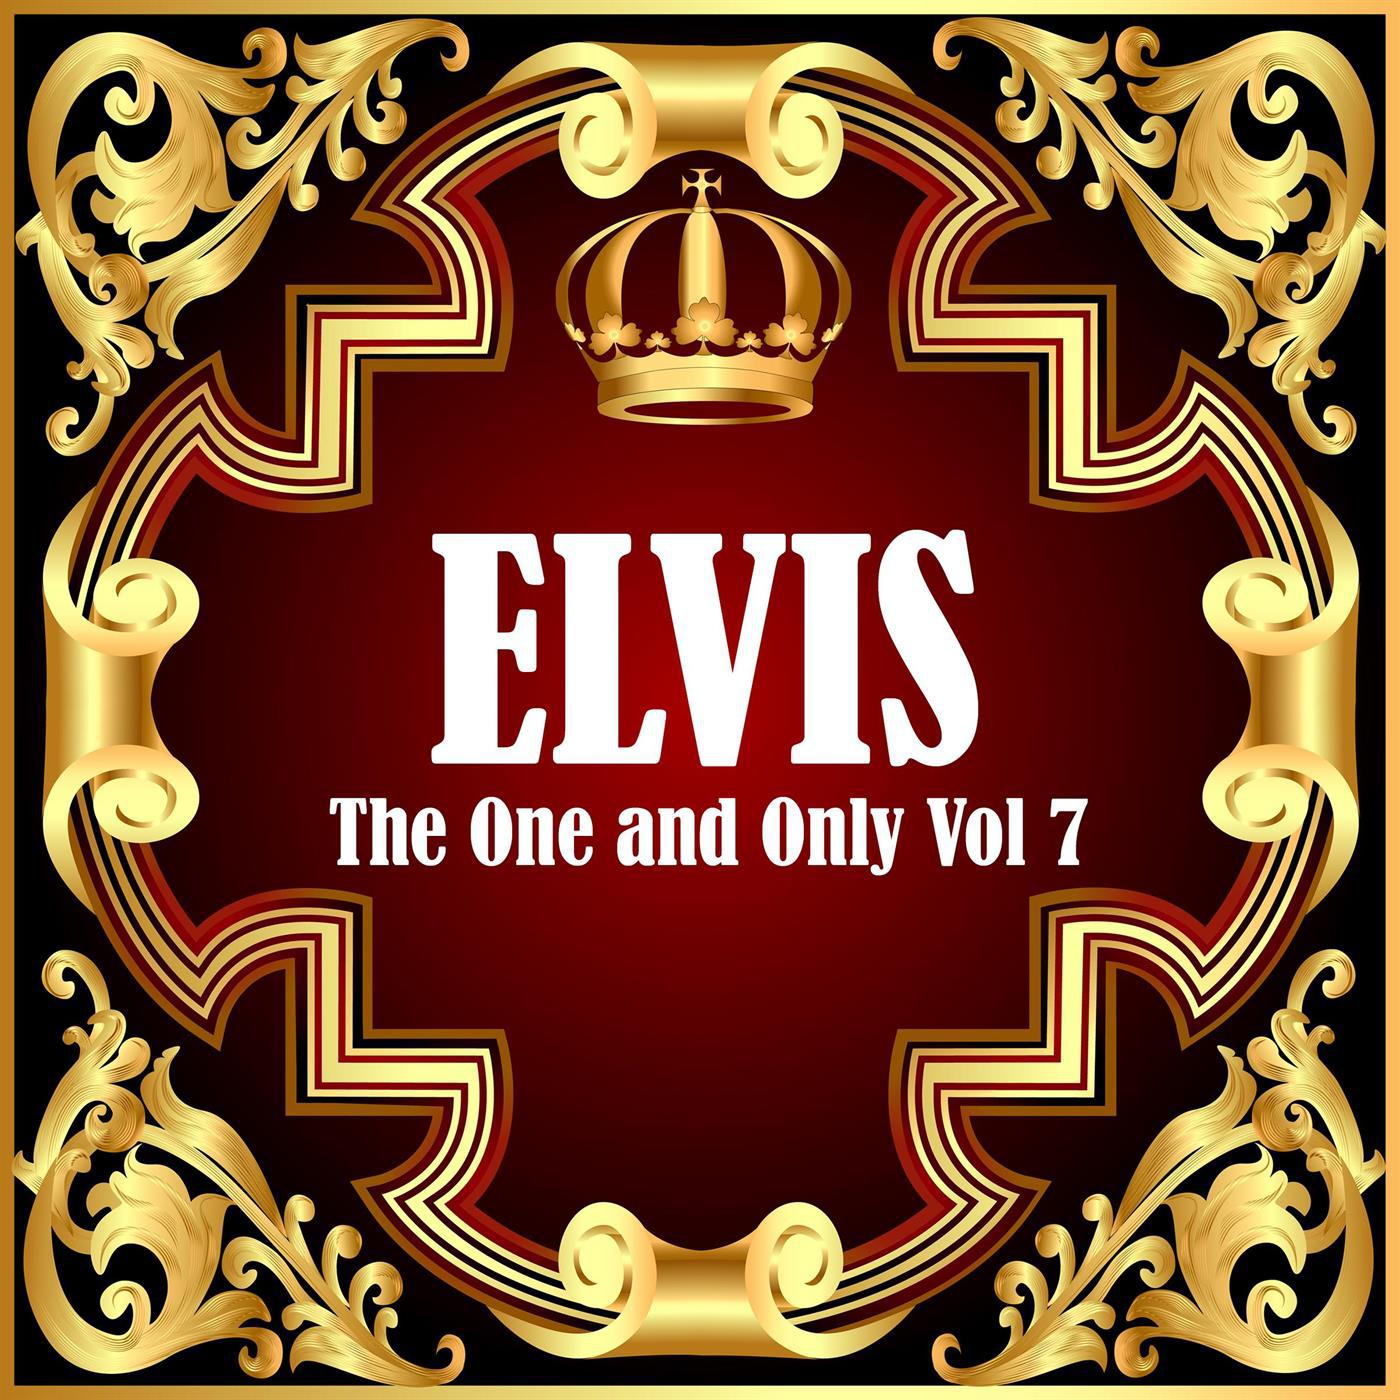 Elvis: The One and Only Vol 7专辑